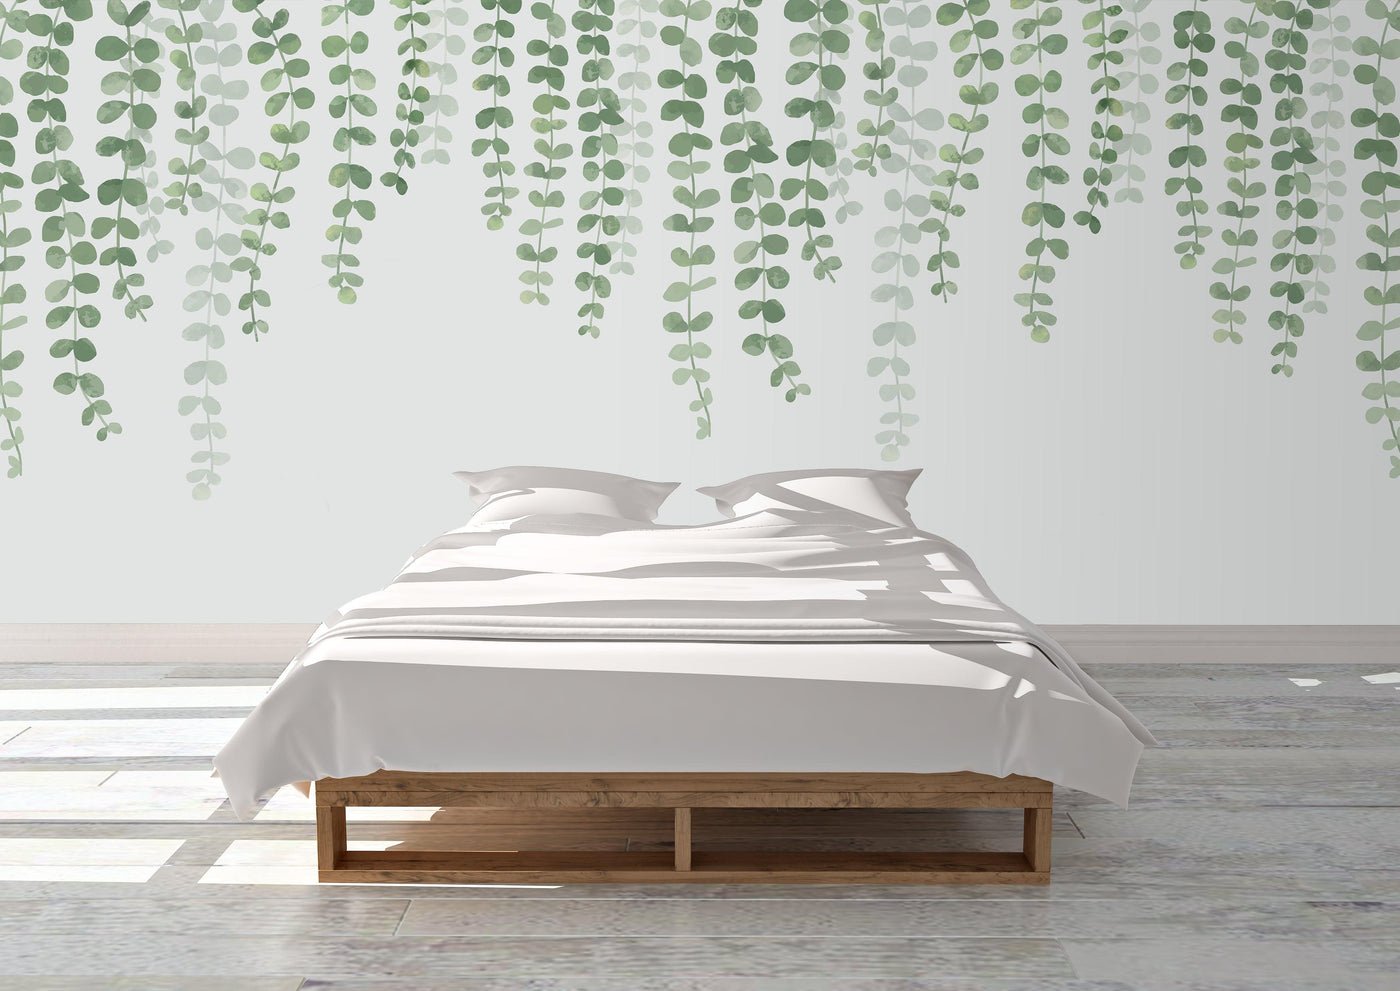 String of Pearls Mural Wallpaper (m²)-Wall Decor-FLORAL WALLPAPERS, KIDS WALLPAPERS, LEAF WALLPAPER, MURALS, MURALS / WALLPAPERS, NON-WOVEN WALLPAPER-Forest Homes-Nature inspired decor-Nature decor